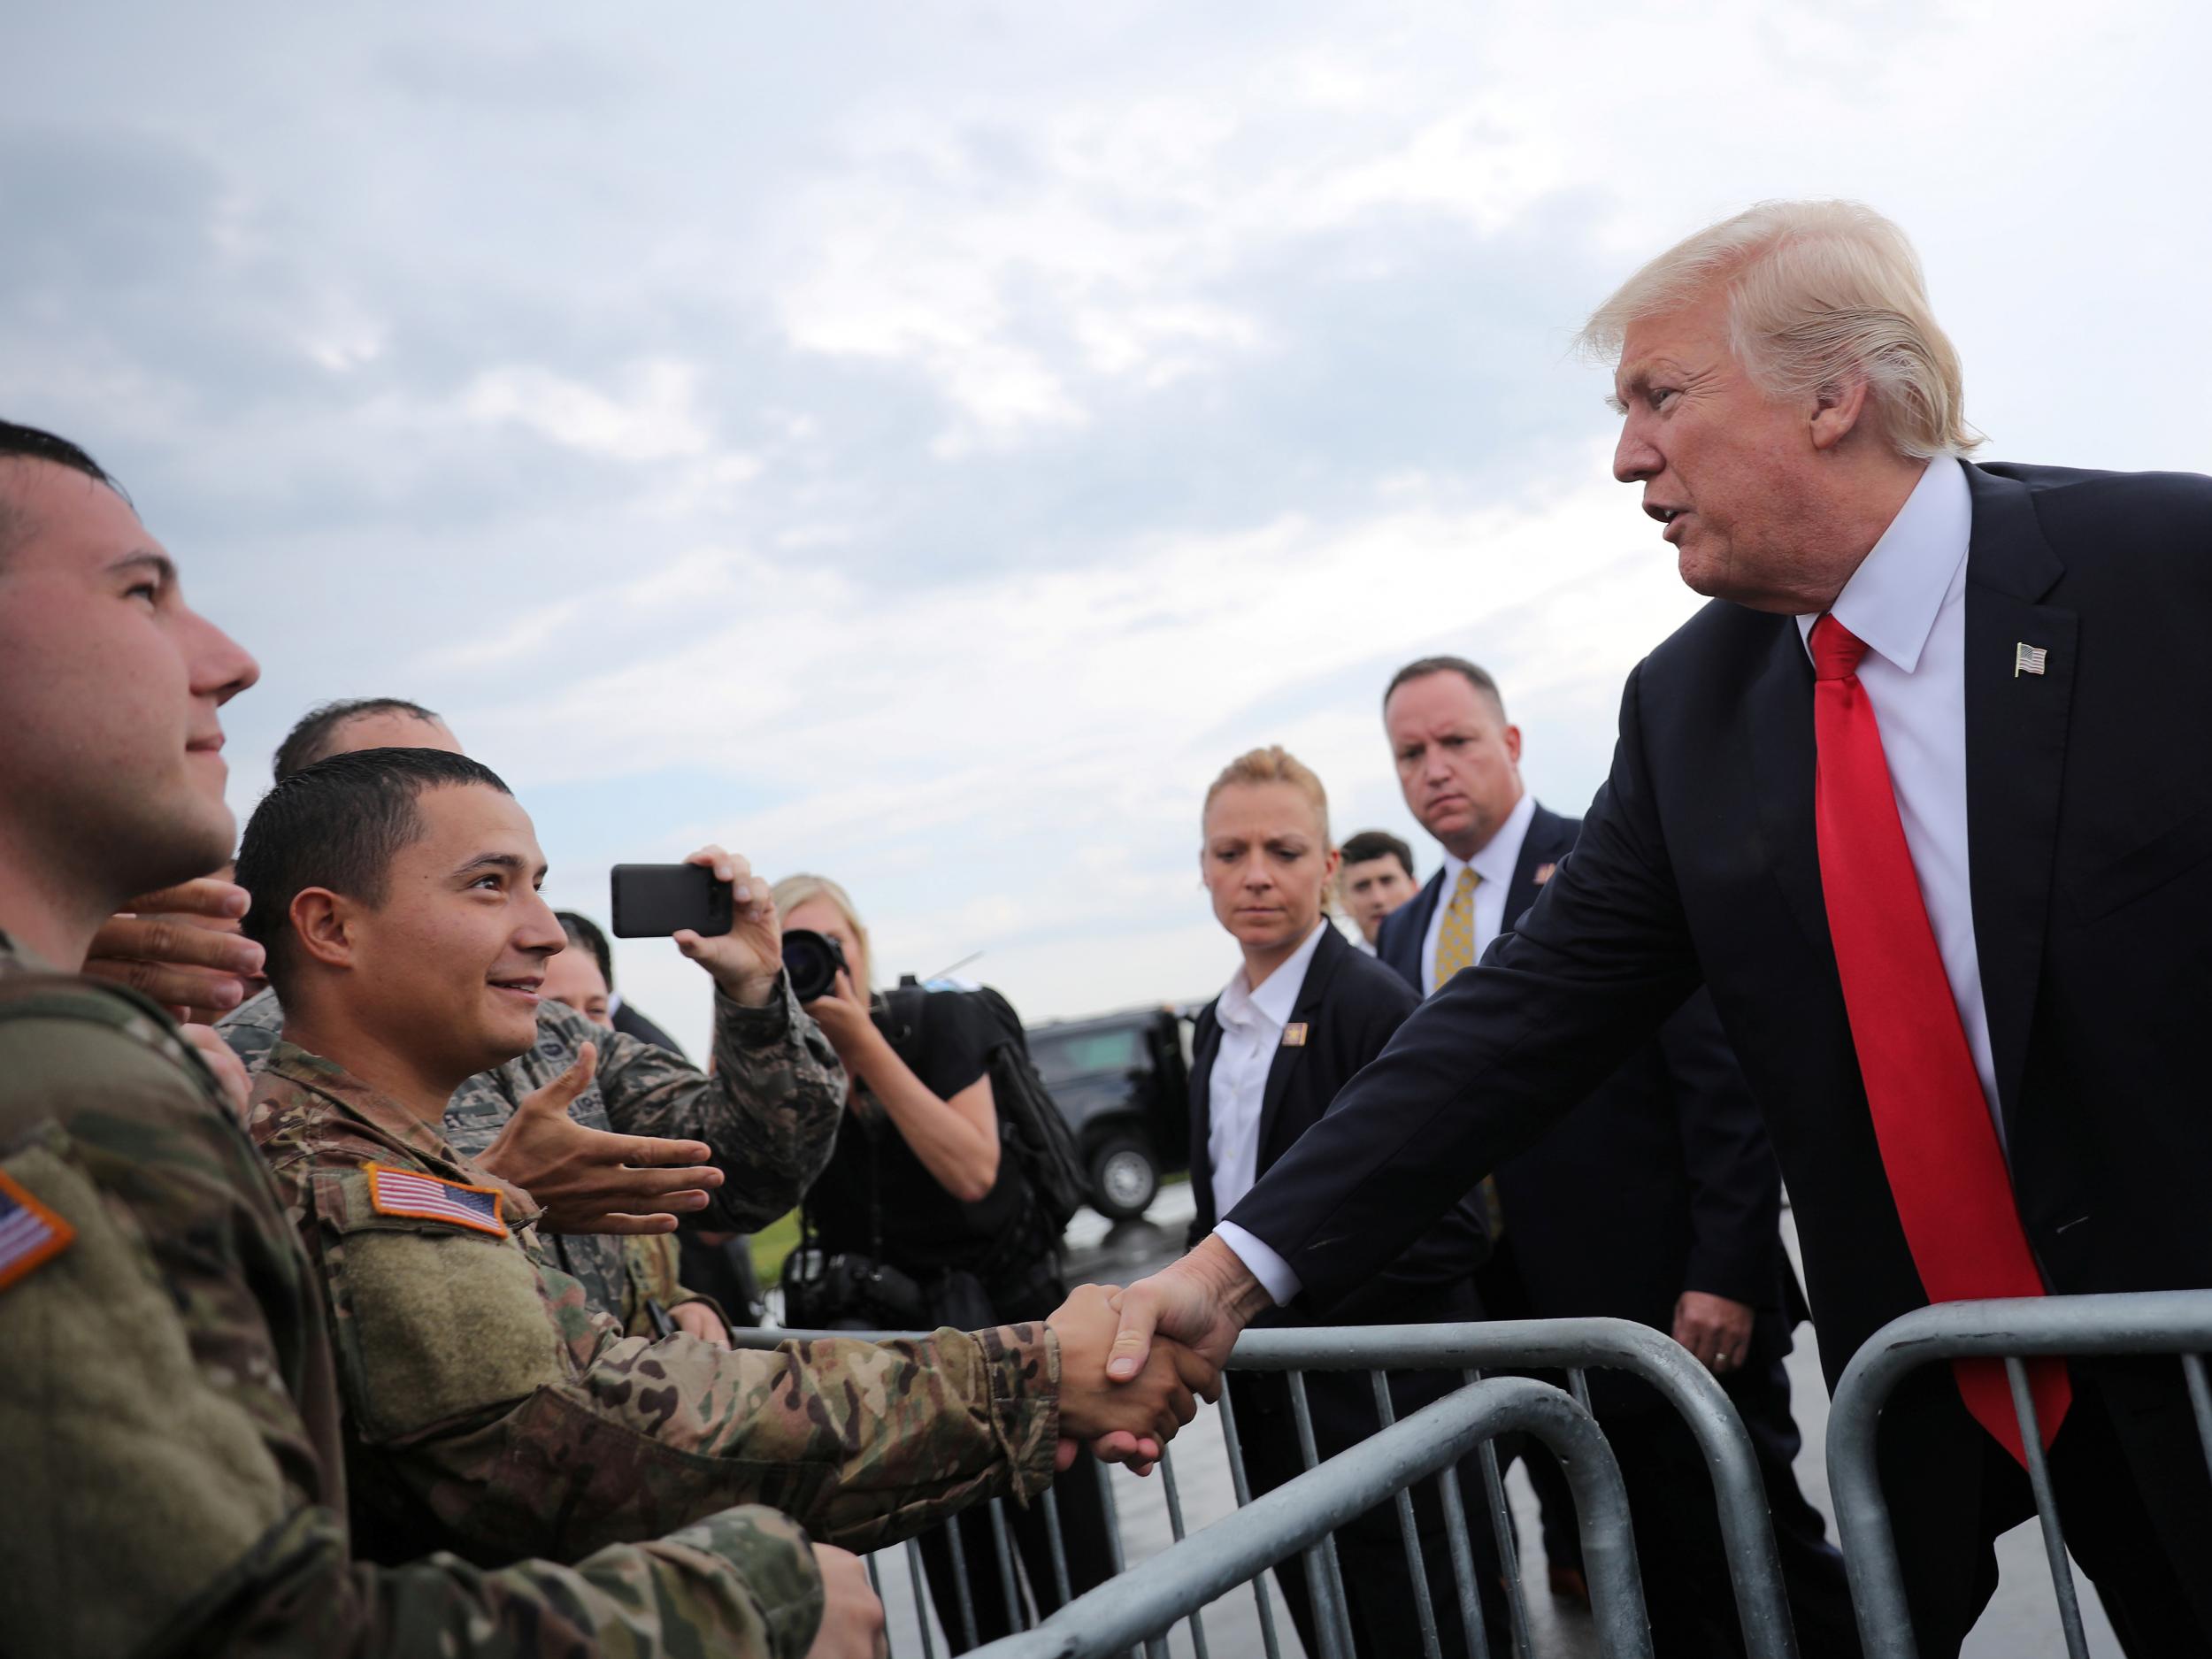 US President Donald Trump greets members of the military as he arrives at Raleigh County Memorial Airport in Beaver, West Virginia, on 24 July 2017